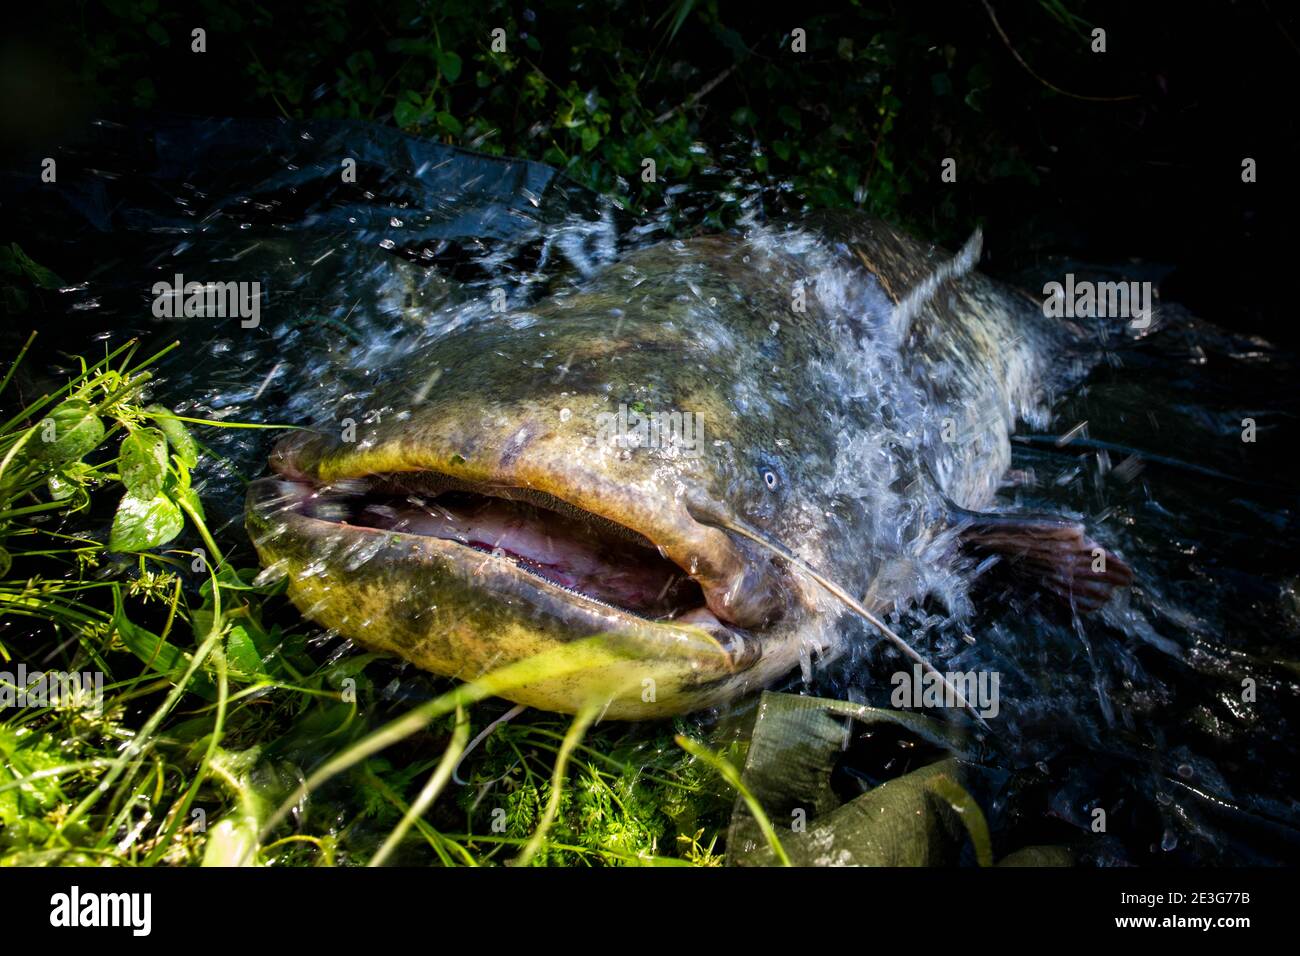 https://c8.alamy.com/comp/2E3G77B/rome-italy-4th-sep-2020-a-large-catfish-in-the-tiber-at-the-marconi-bridge-in-rome-the-skin-of-the-giant-catfish-secretes-a-gelatinous-substance-which-in-addition-to-protecting-it-from-disease-allows-it-to-move-easily-among-the-rocks-of-the-seabed-without-risking-injury-credit-luigi-avantaggiatozuma-wirealamy-live-news-2E3G77B.jpg